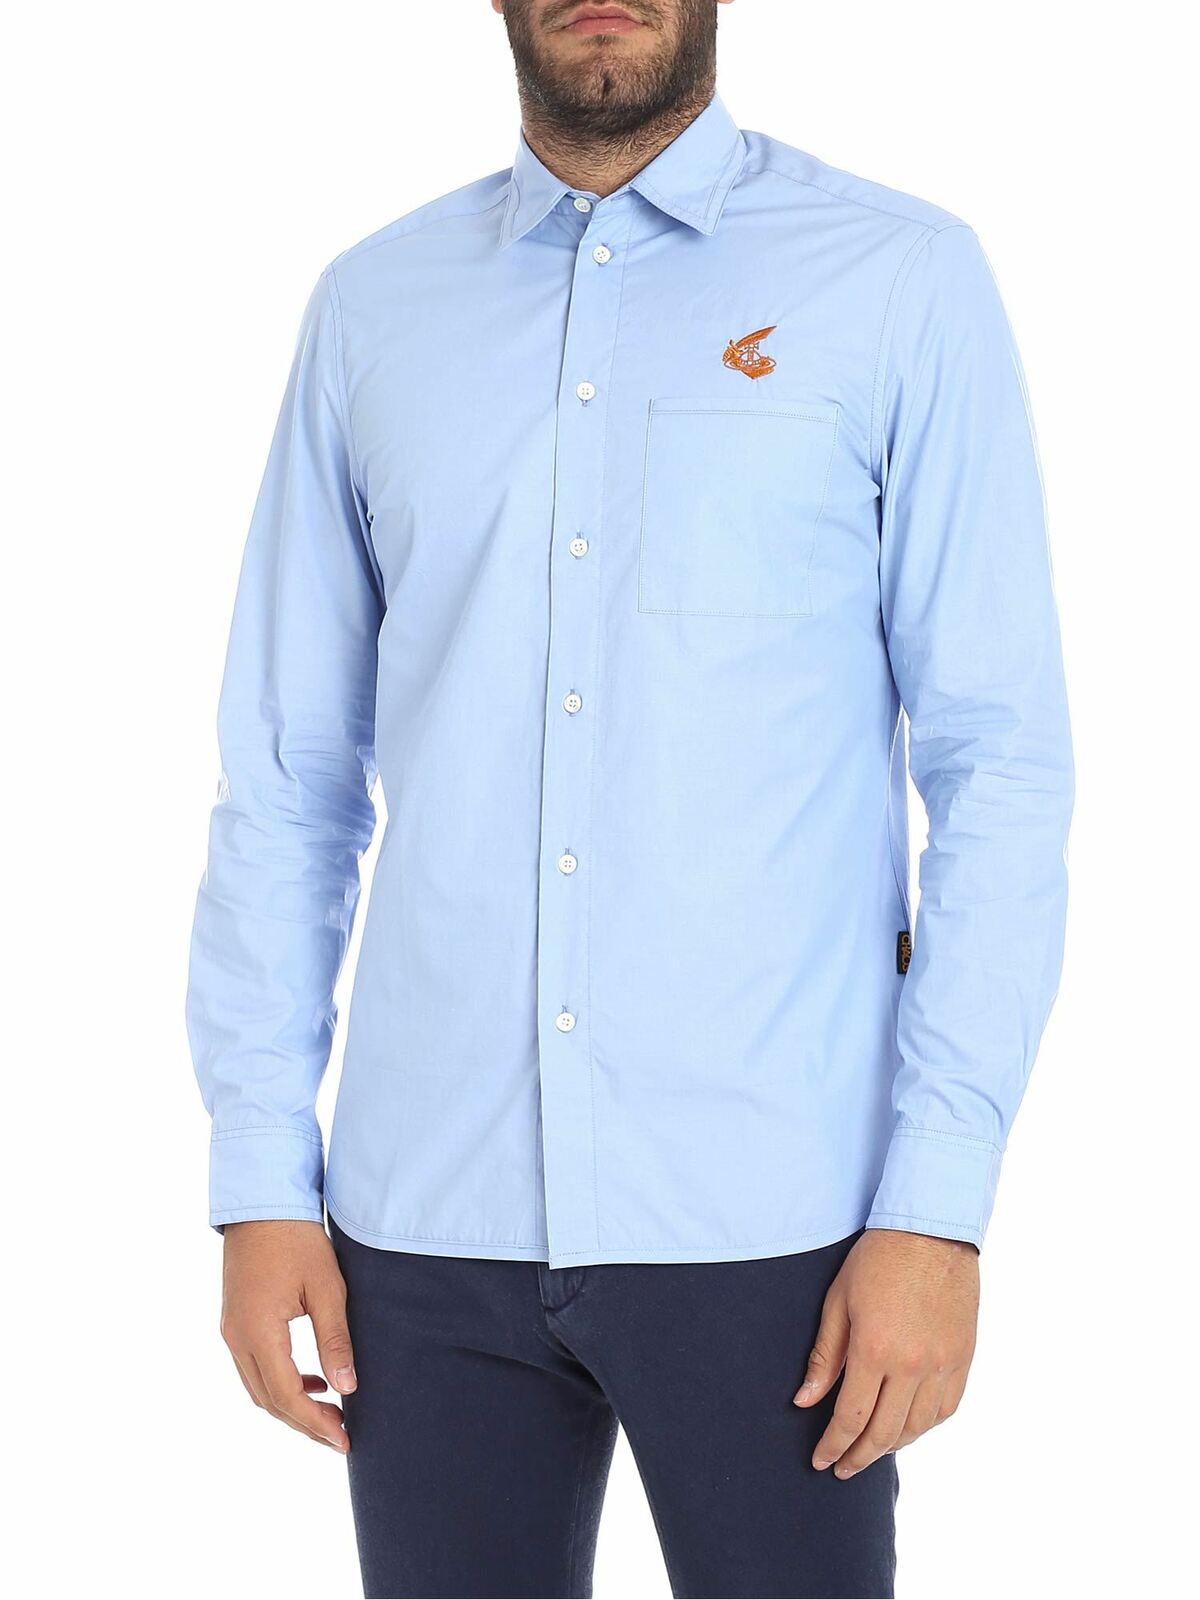 Vivienne Westwood Anglomania Camisa - Azul Claro In Light Blue